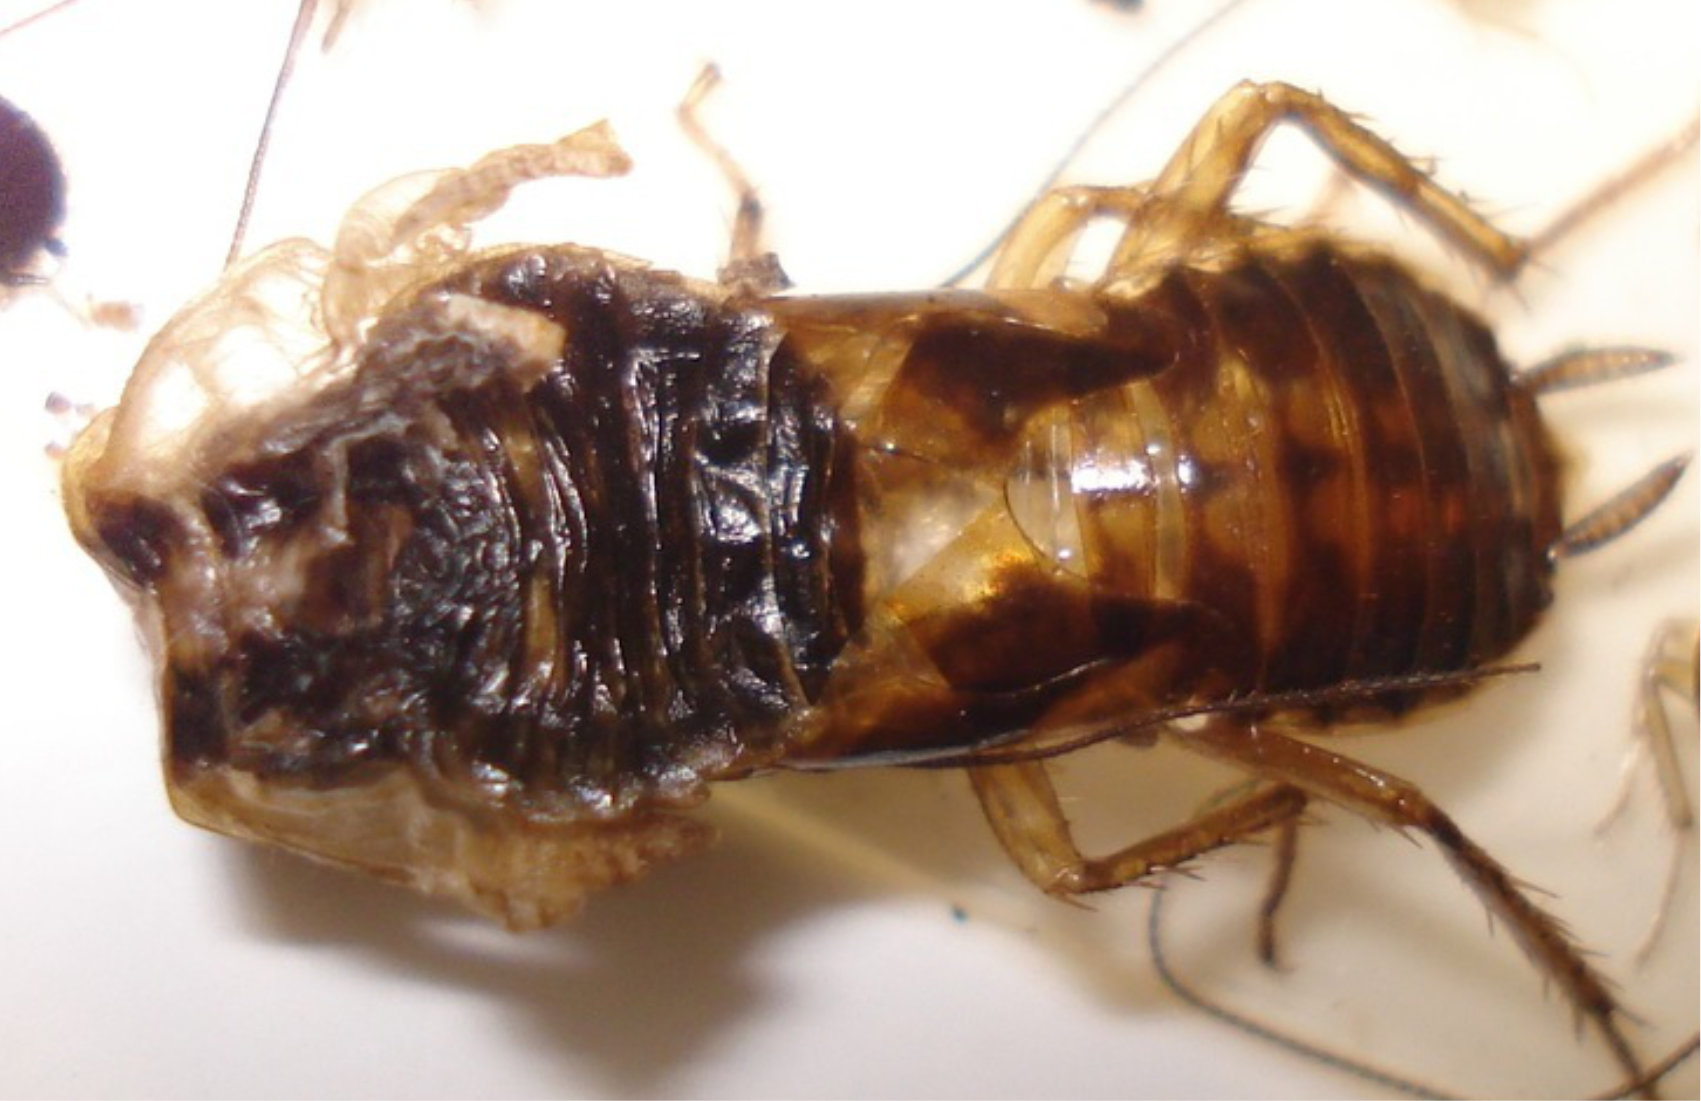 An image of a crushed baby roach